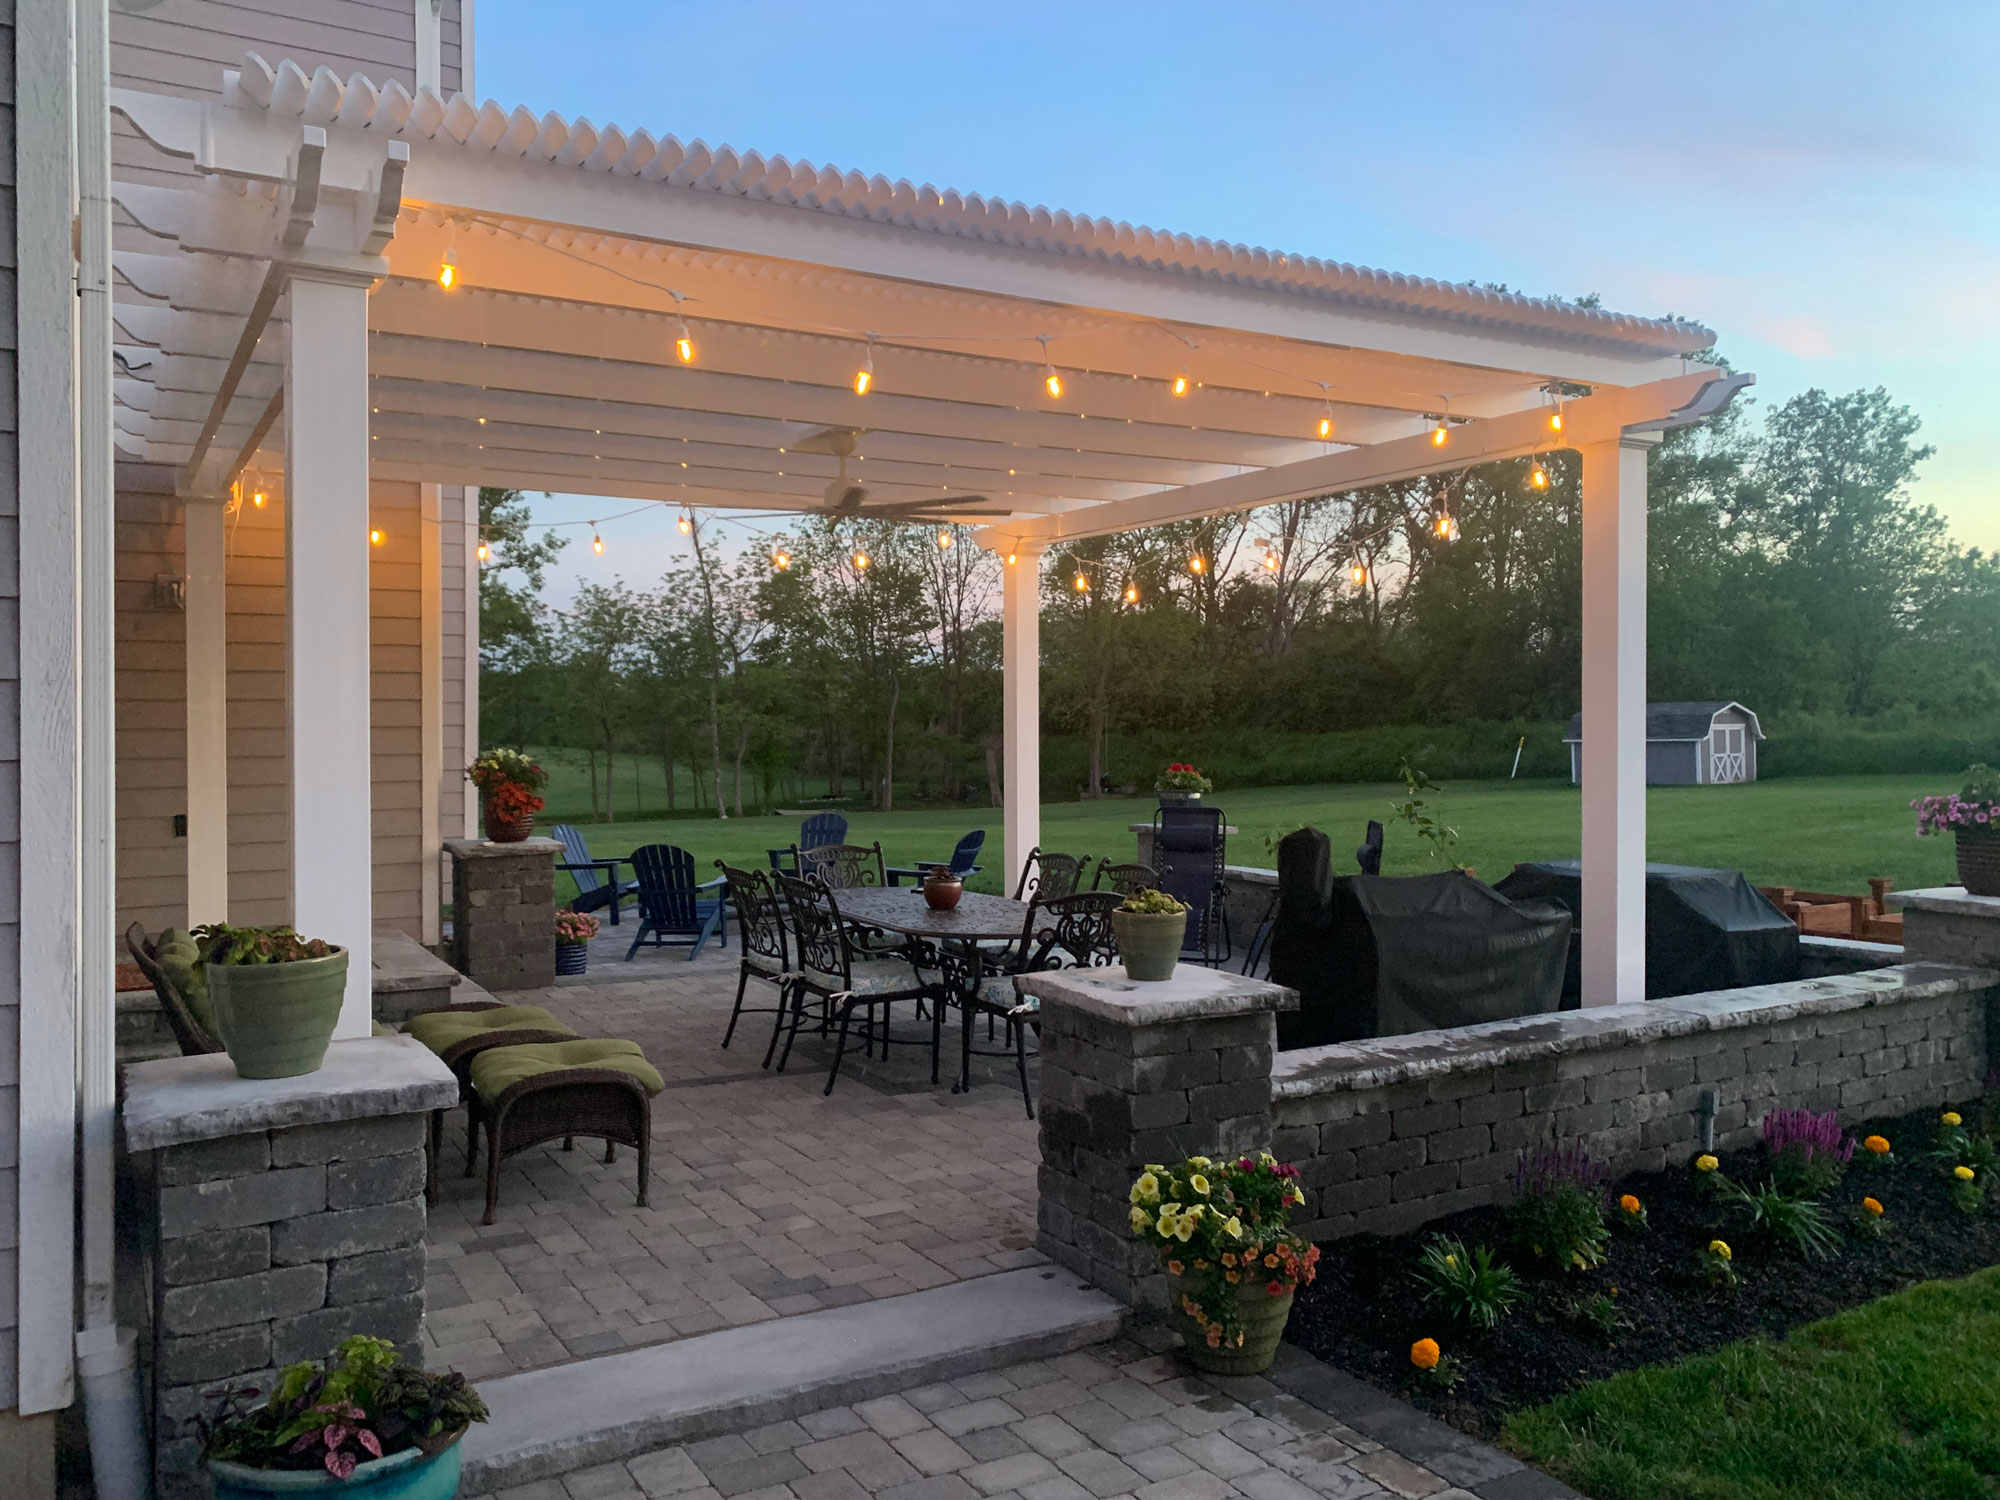 White freestanding pergola over a hardscaped patio outdoor dining room